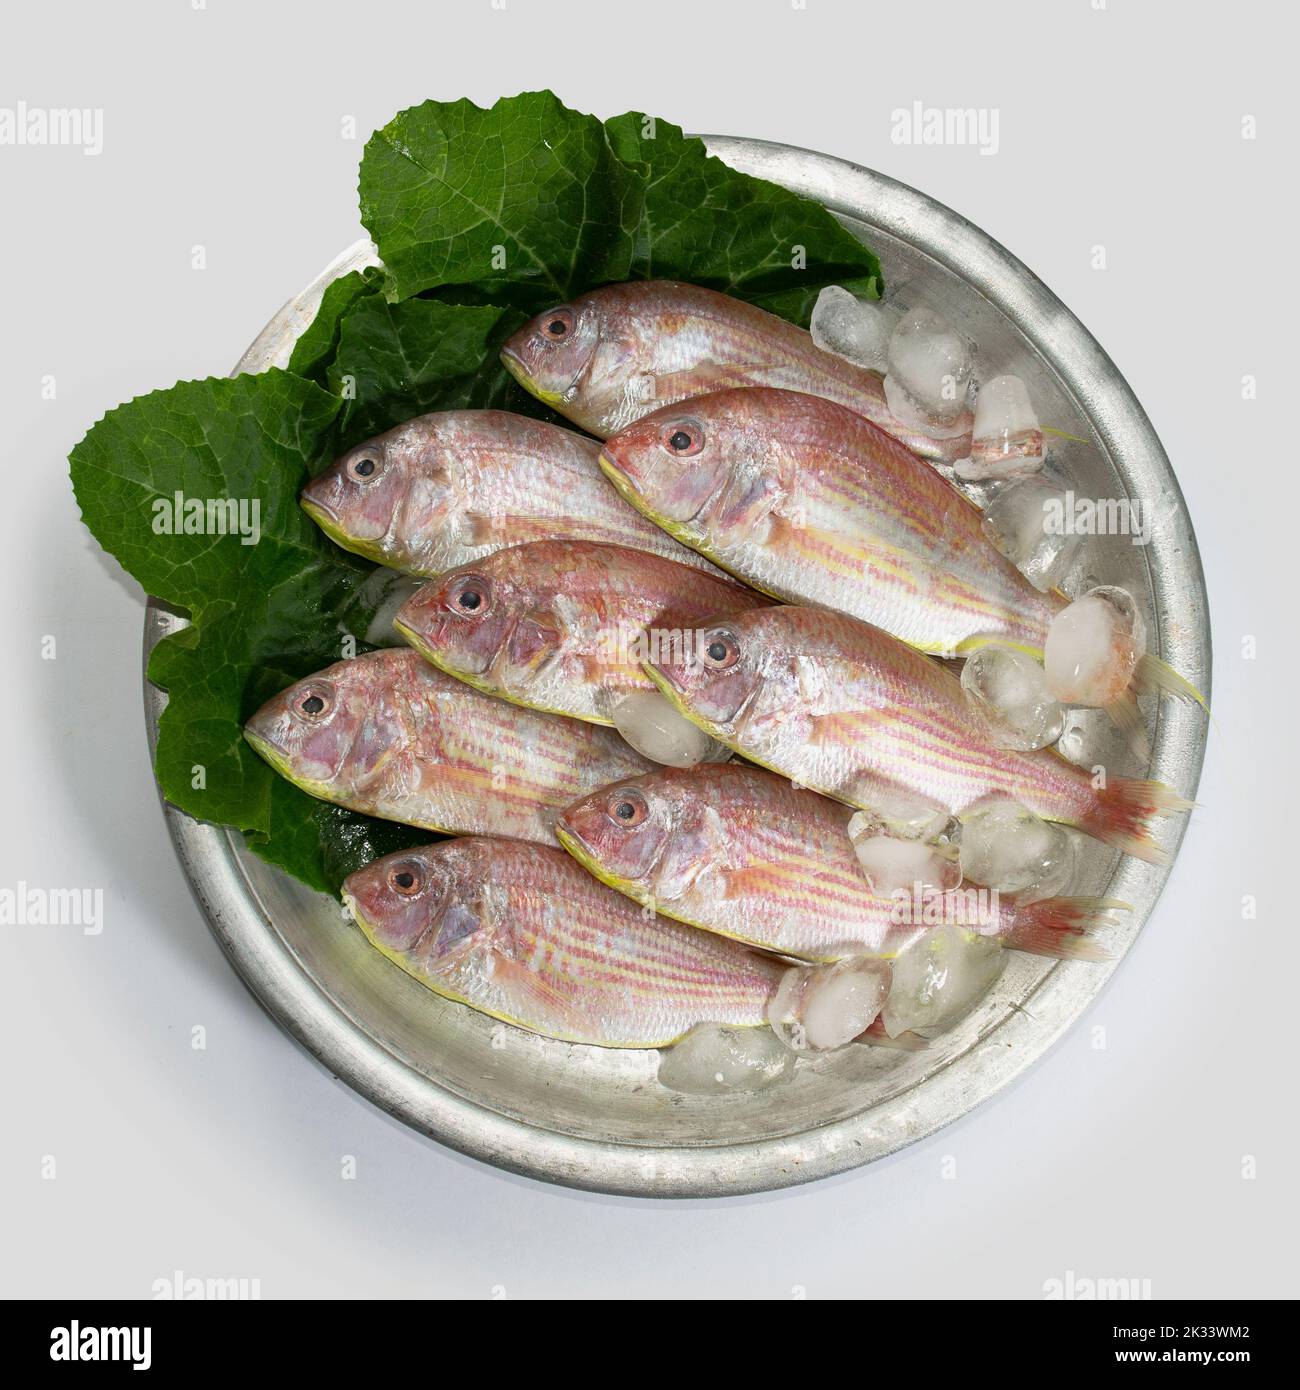 Red croaker, Lal poa, Pama, Poa fish on aluminum tray with pumpkin leaves. seafood. Stock Photo